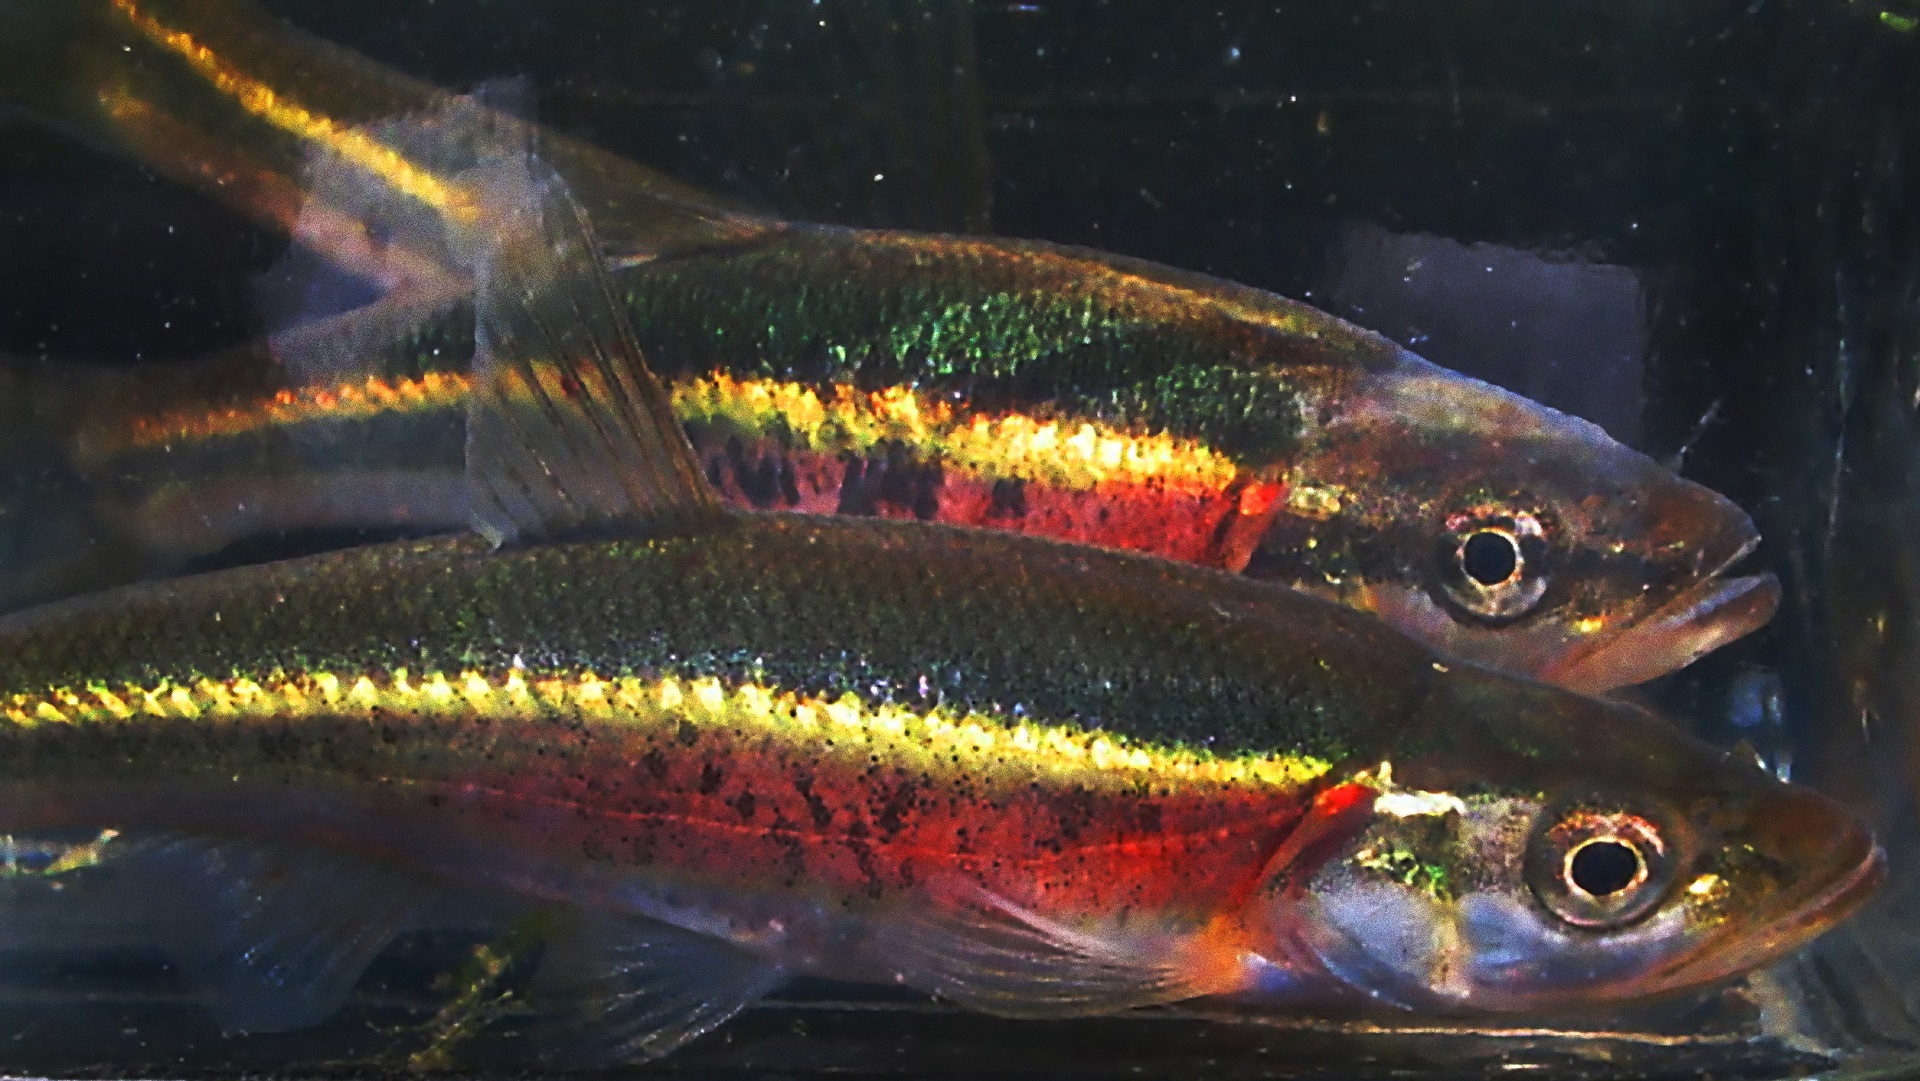 Redside Dace is a sensitive fish species found in the Seaton Development lands area